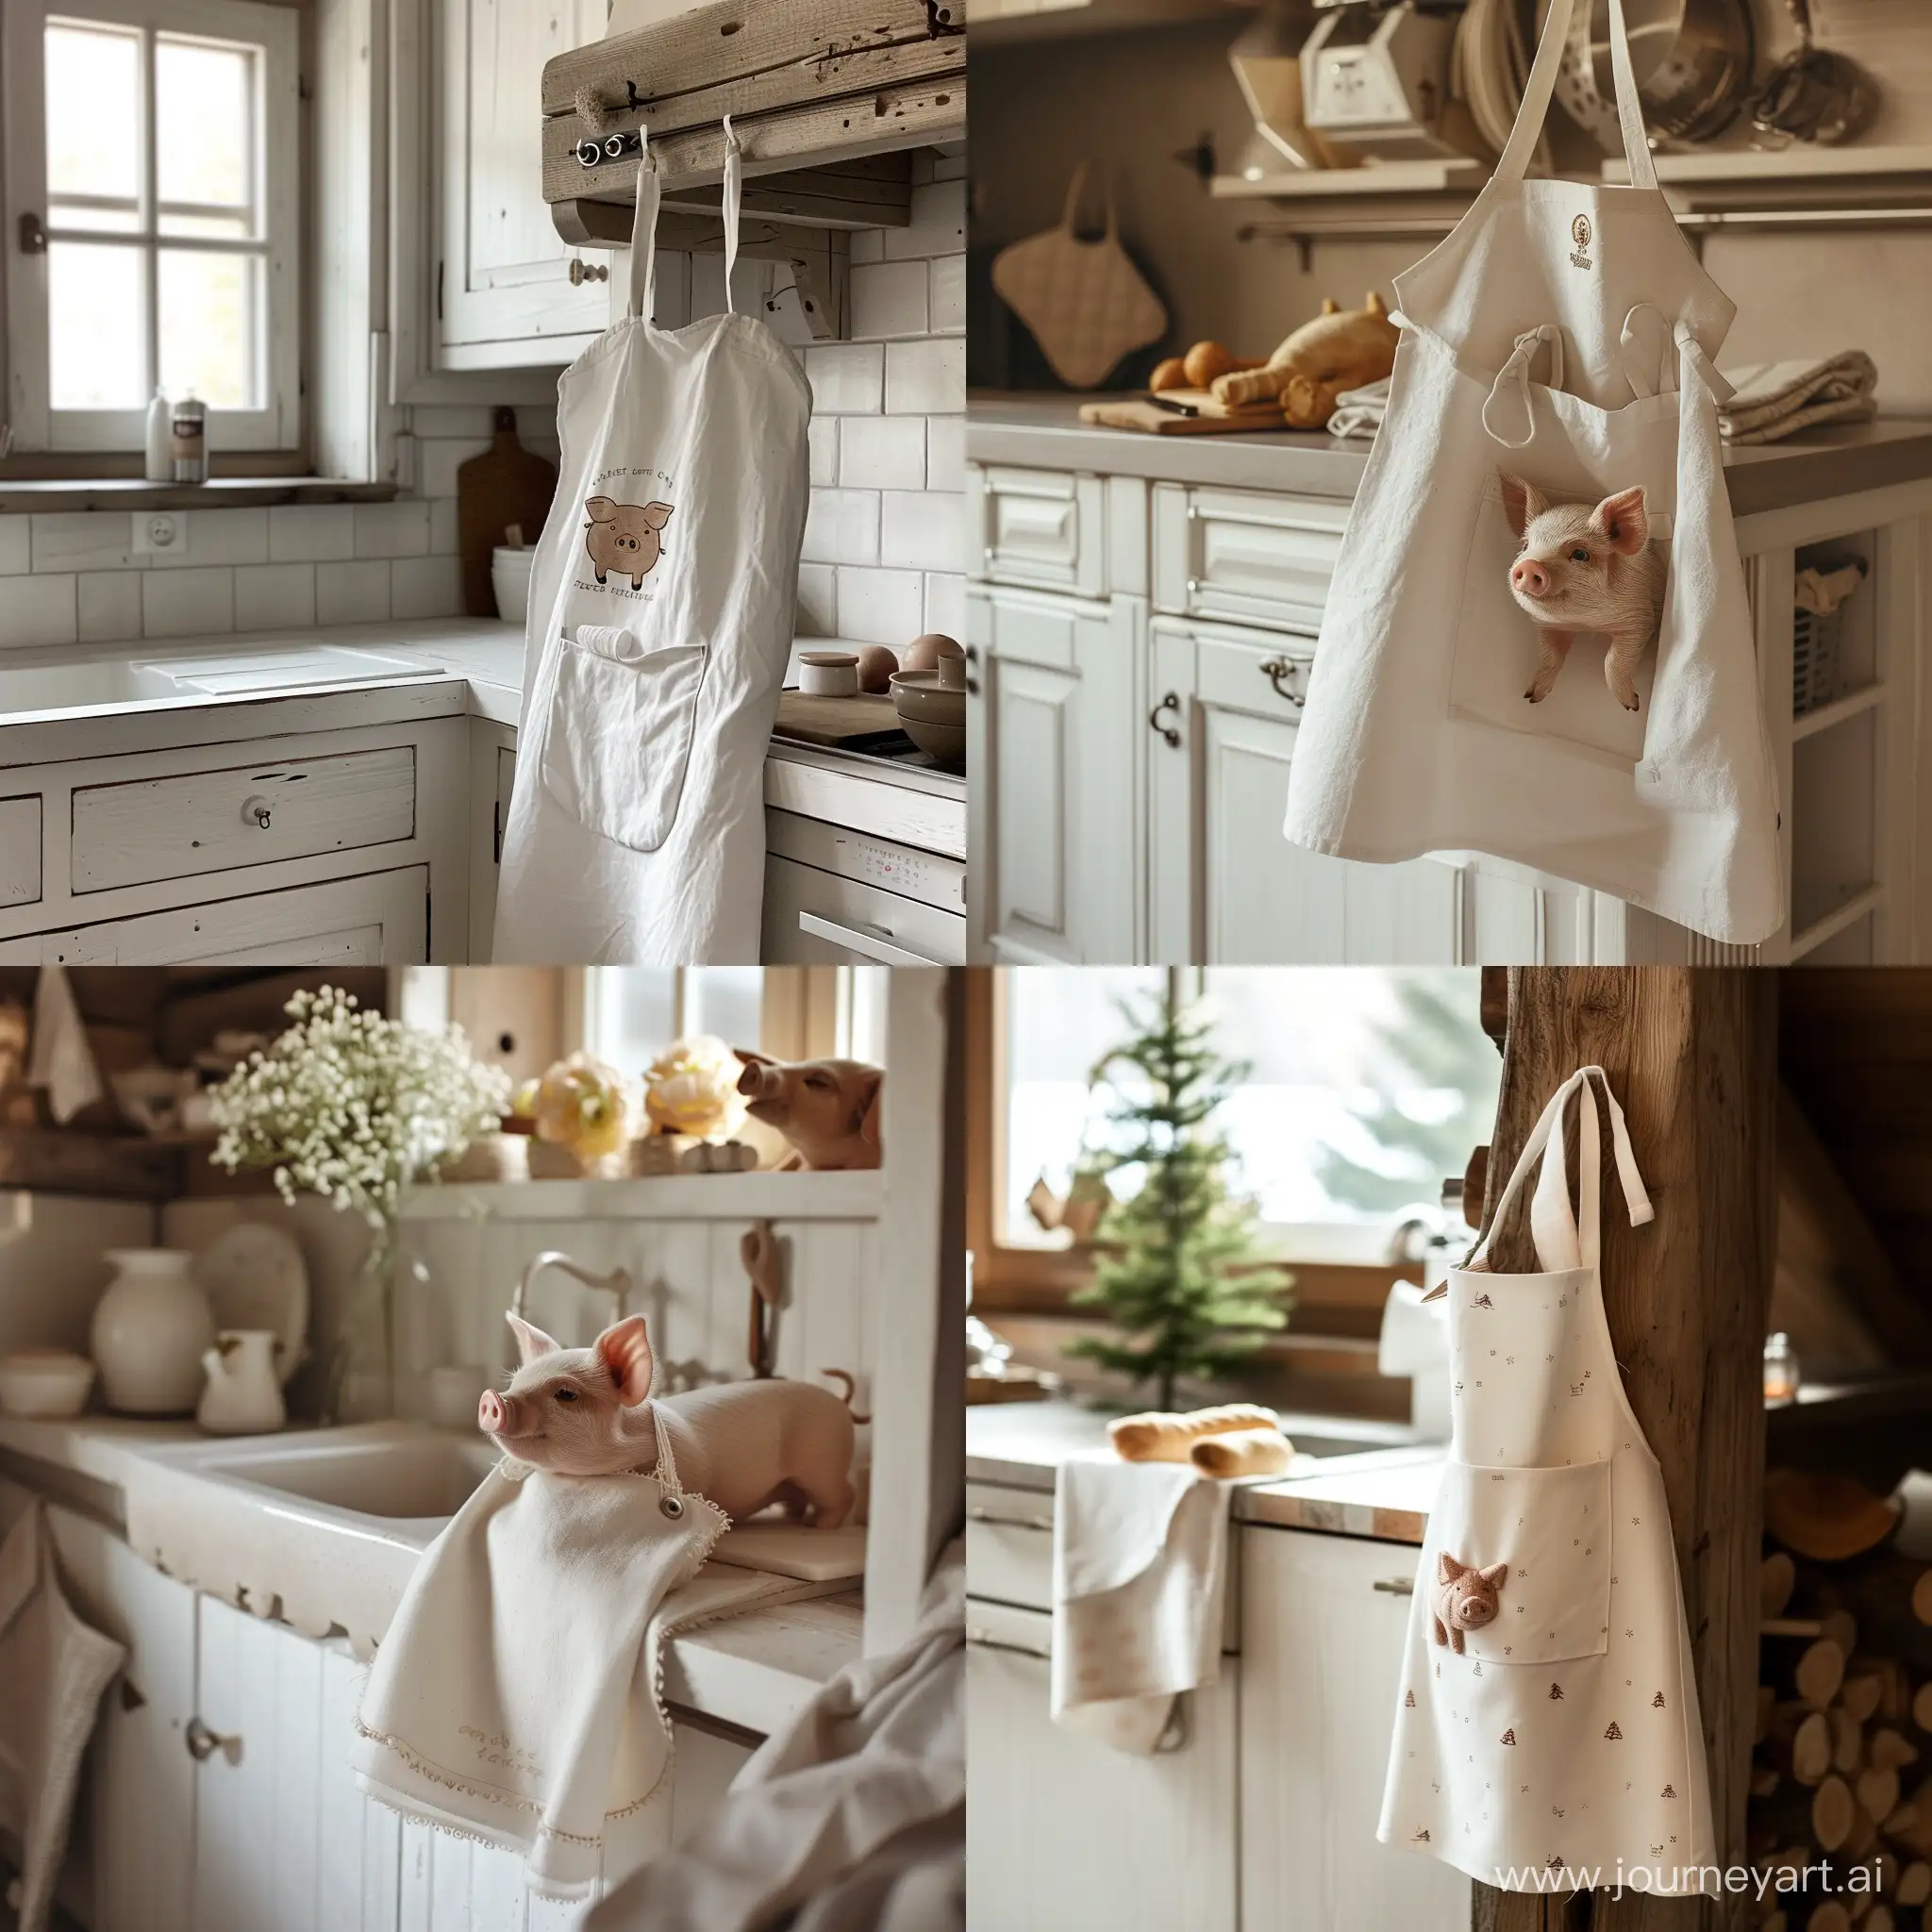 Cozy-ChaletStyle-Kitchen-Scene-with-Pig-Apron